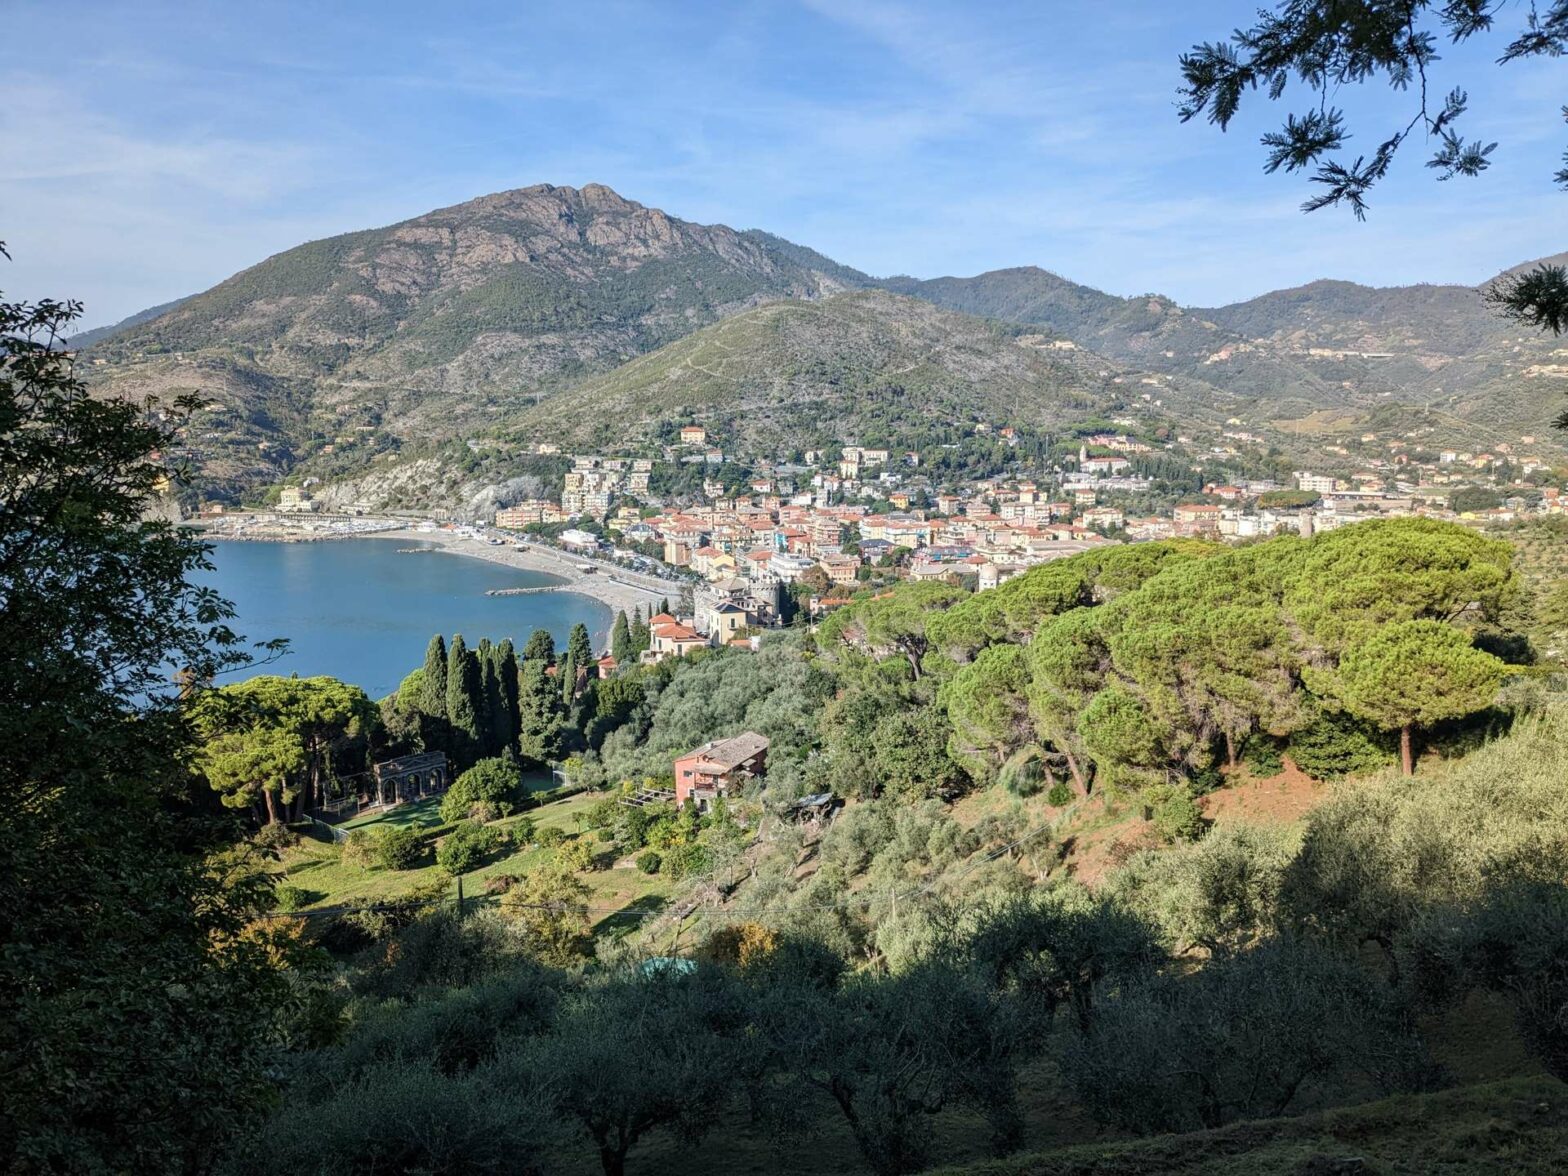 Looking back on Levanto while hiking to Monterosso